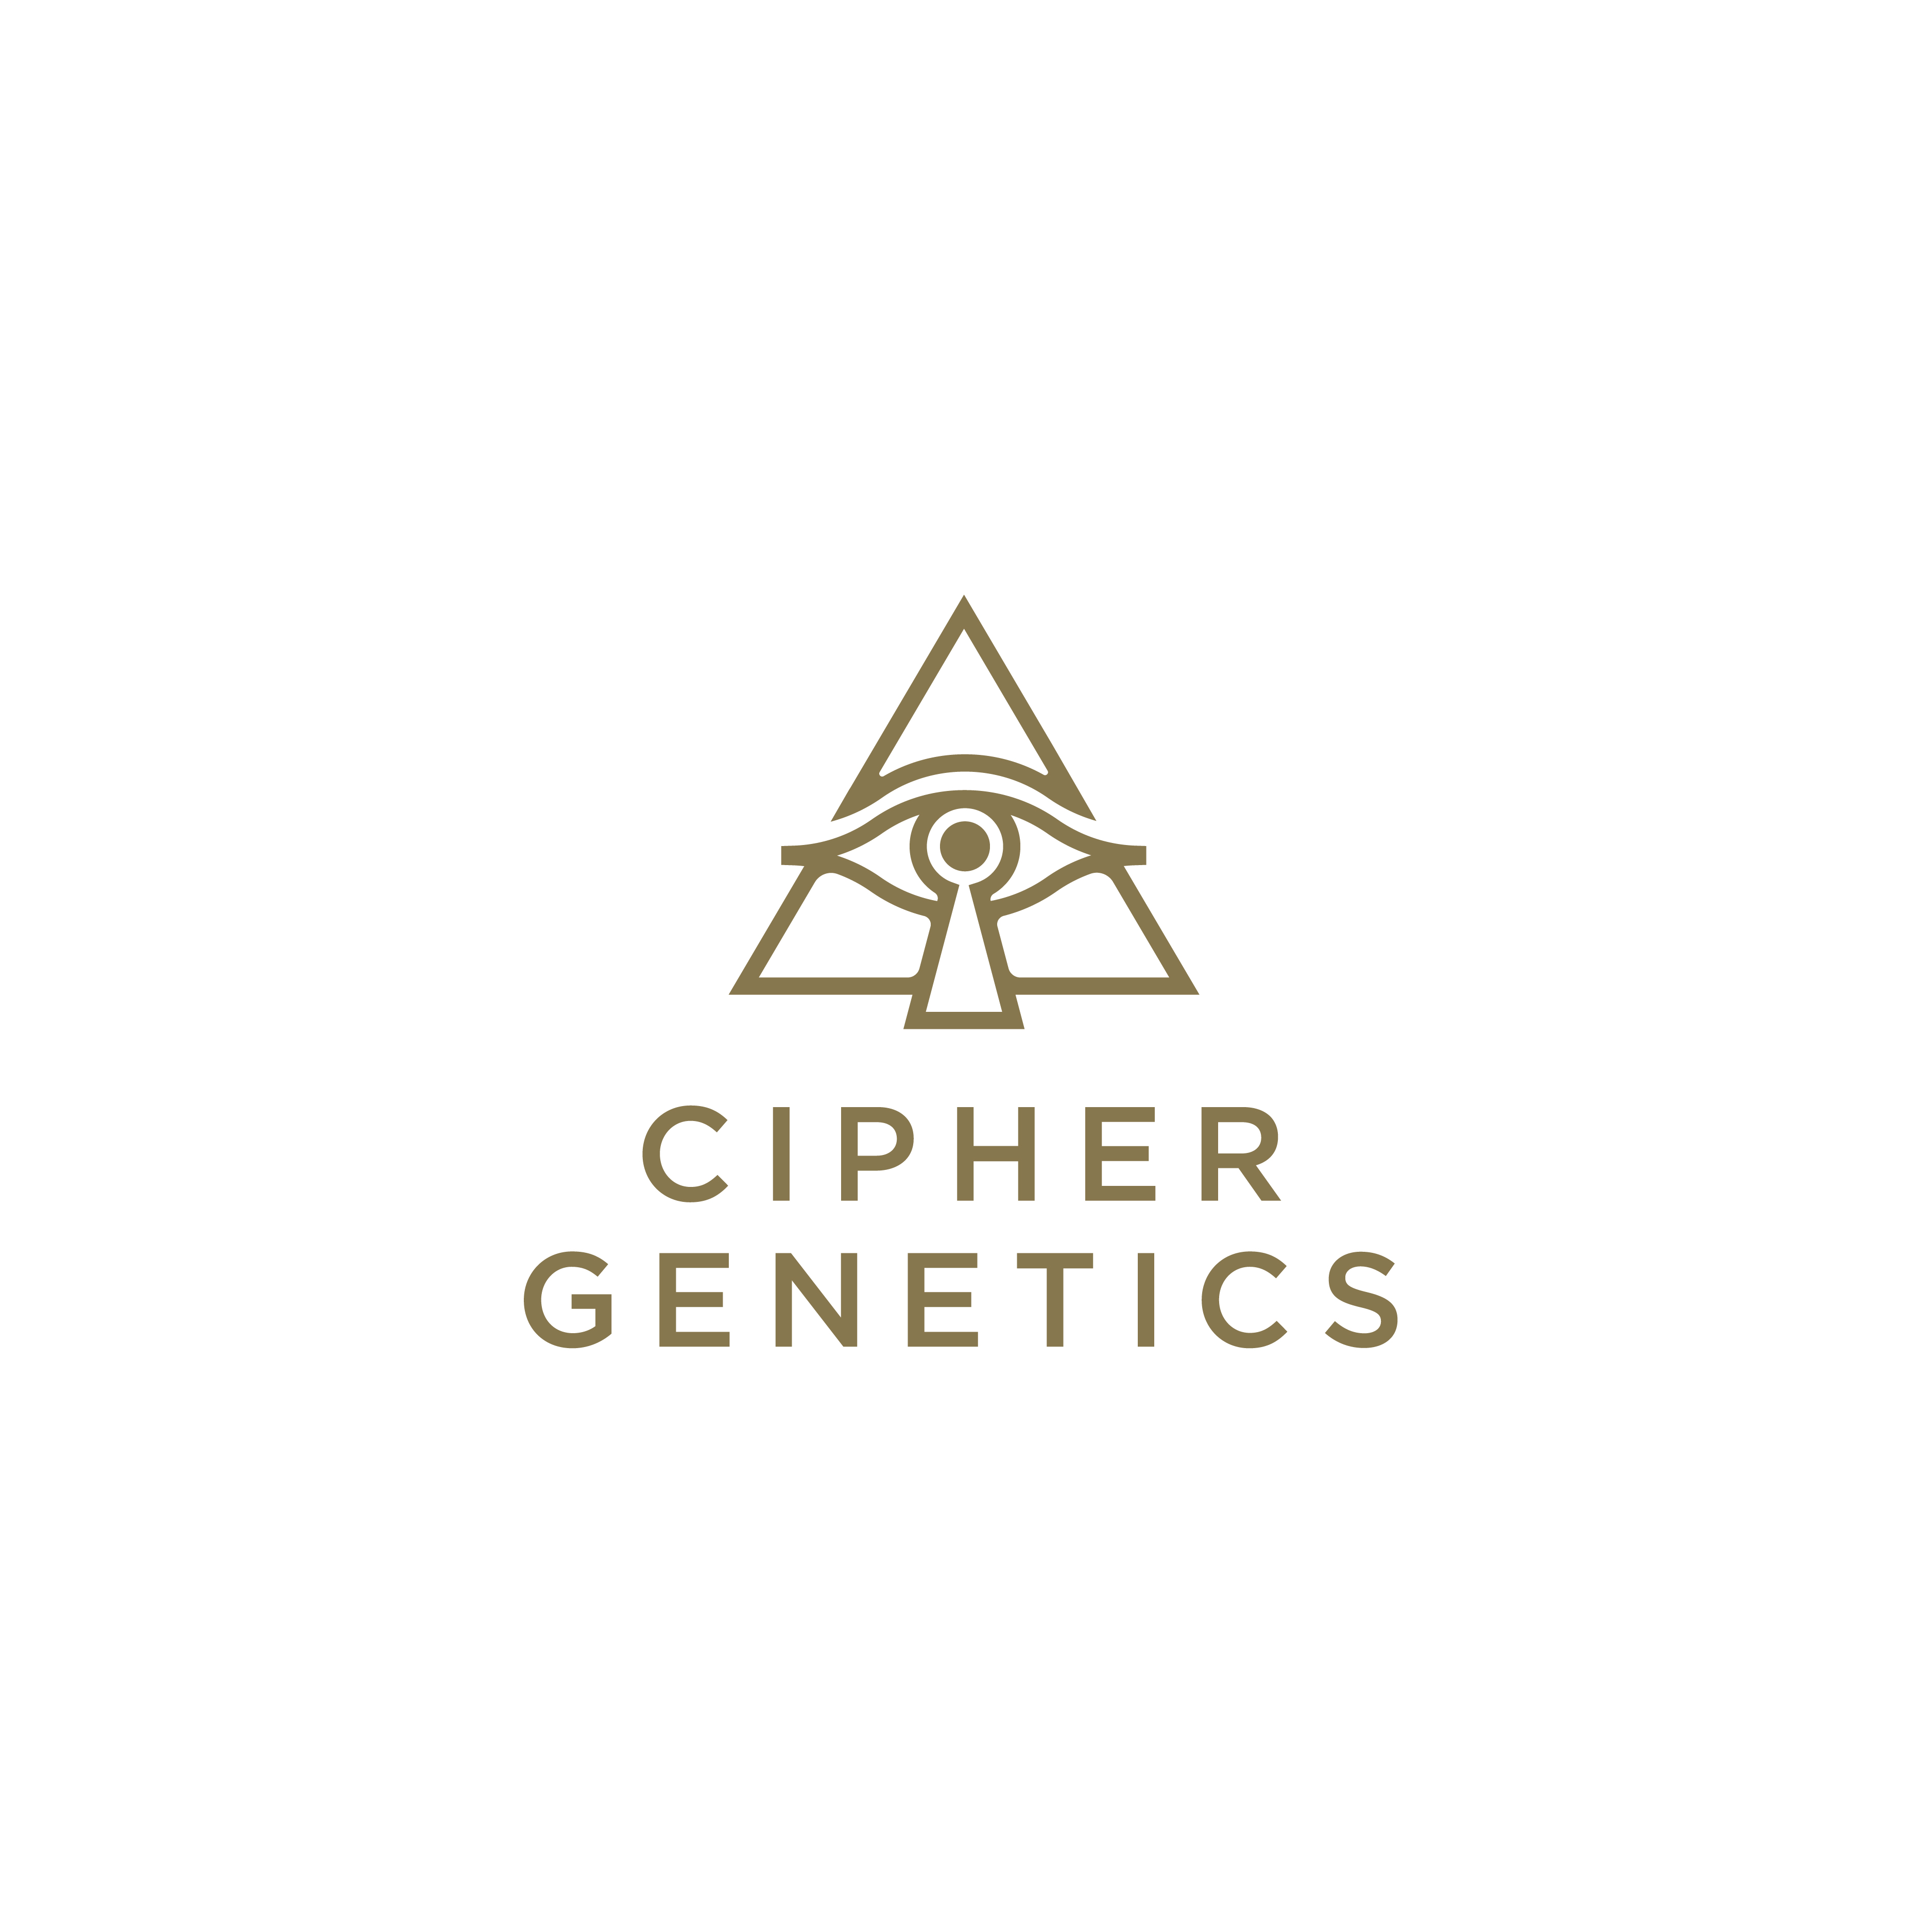 Cipher Genetics logo design by logo designer Steely Works for your inspiration and for the worlds largest logo competition